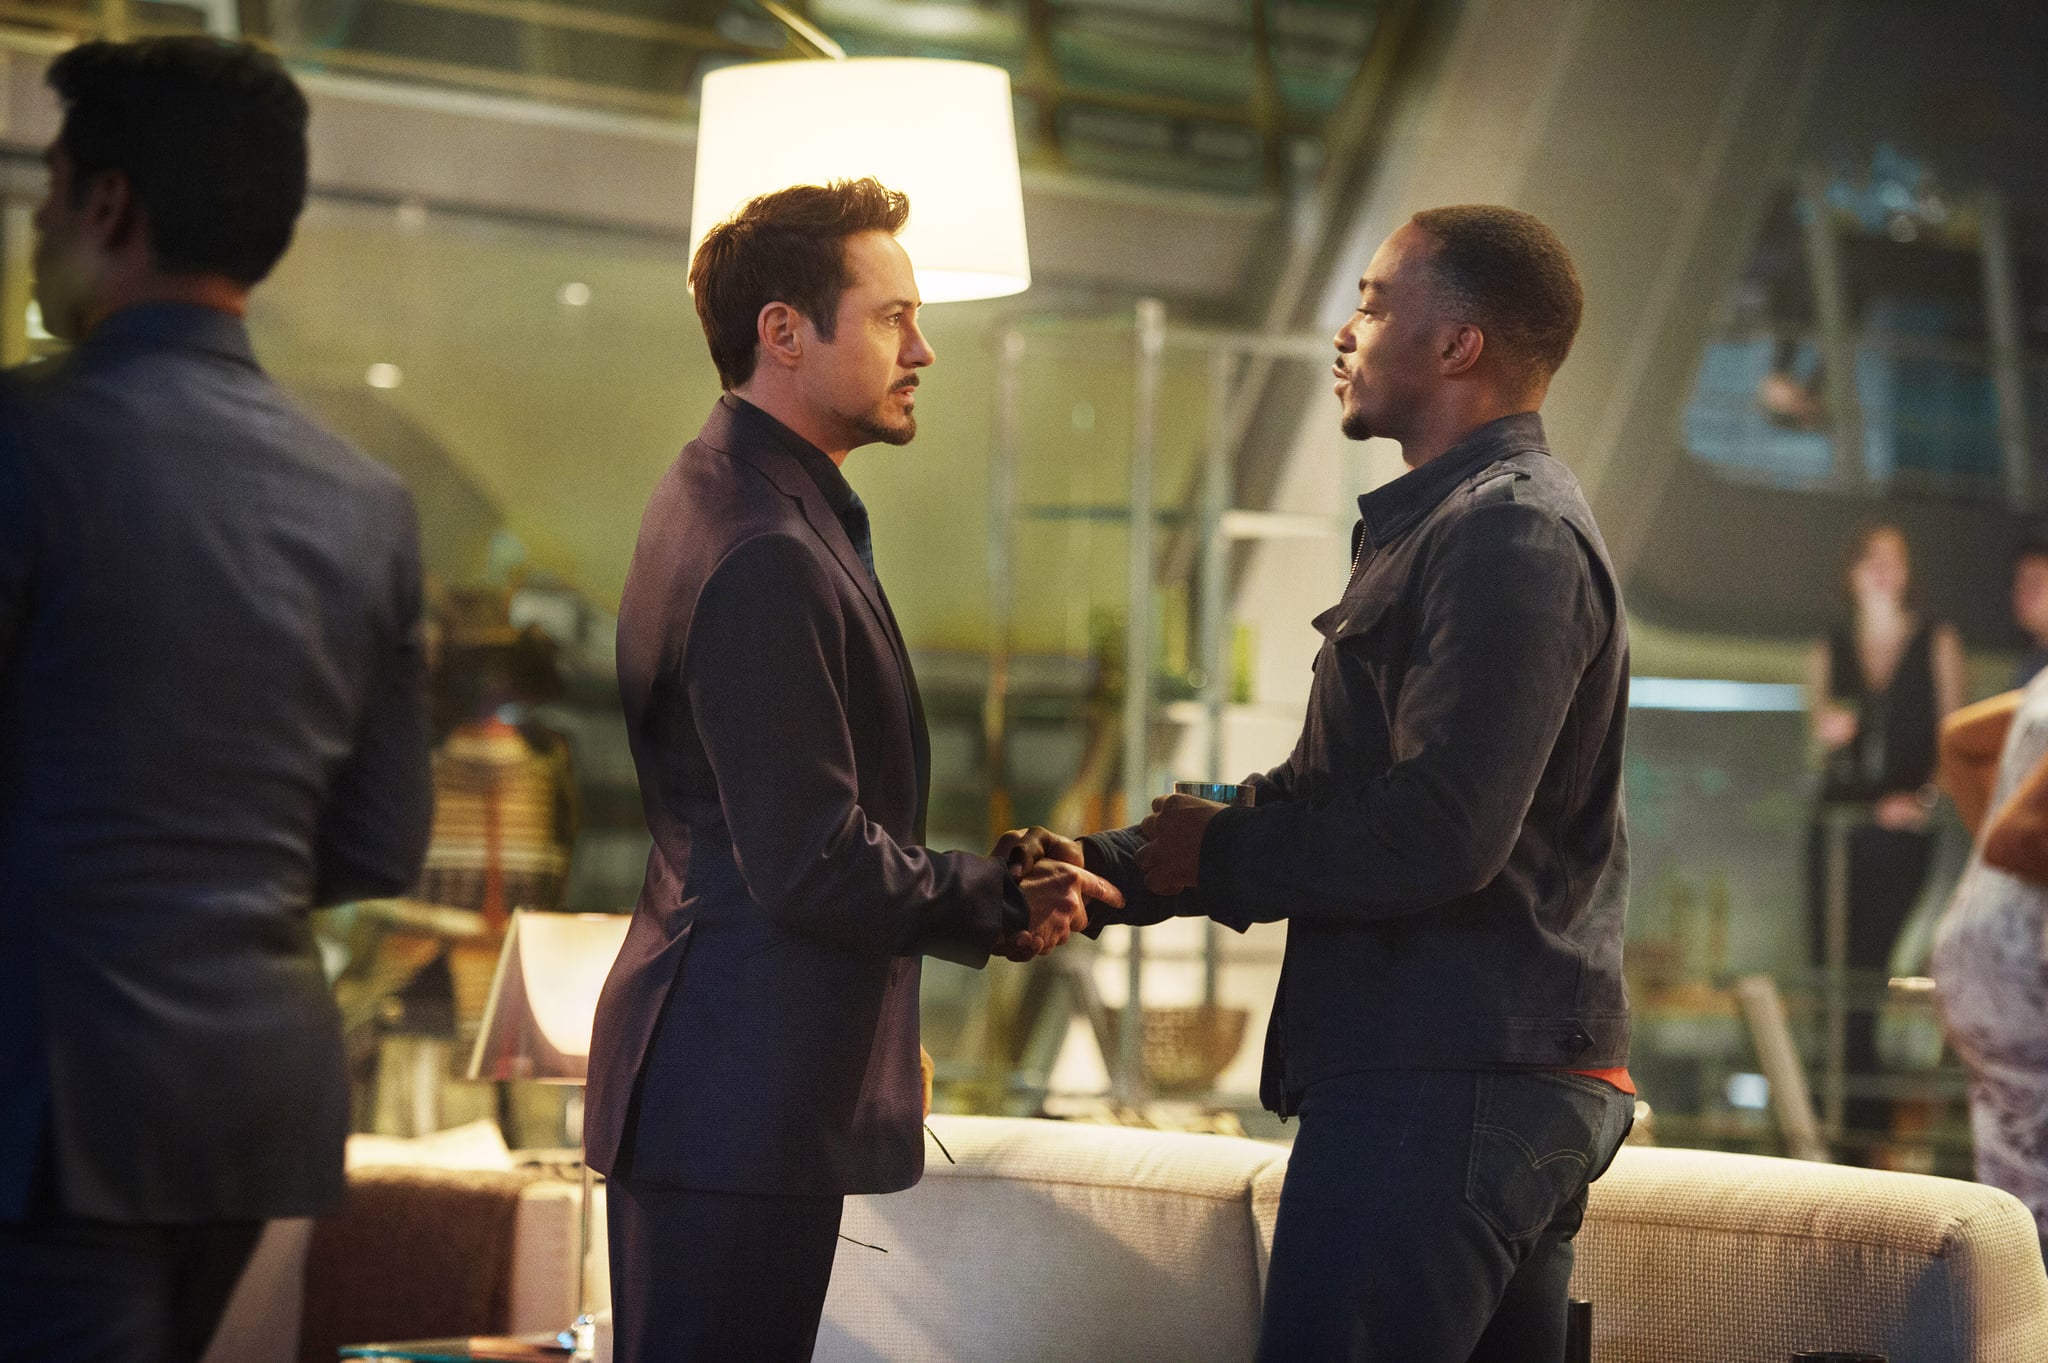 AVENGERS: AGE OF ULTRON, from left: Robert Downey Jr. as Tony Stark/Iron Man, Anthony Mackie as Sam Wilson/Falcon, 2015. ph: Jay Maidment /  Walt Disney Studios Motion Pictures / courtesy Everett Collection